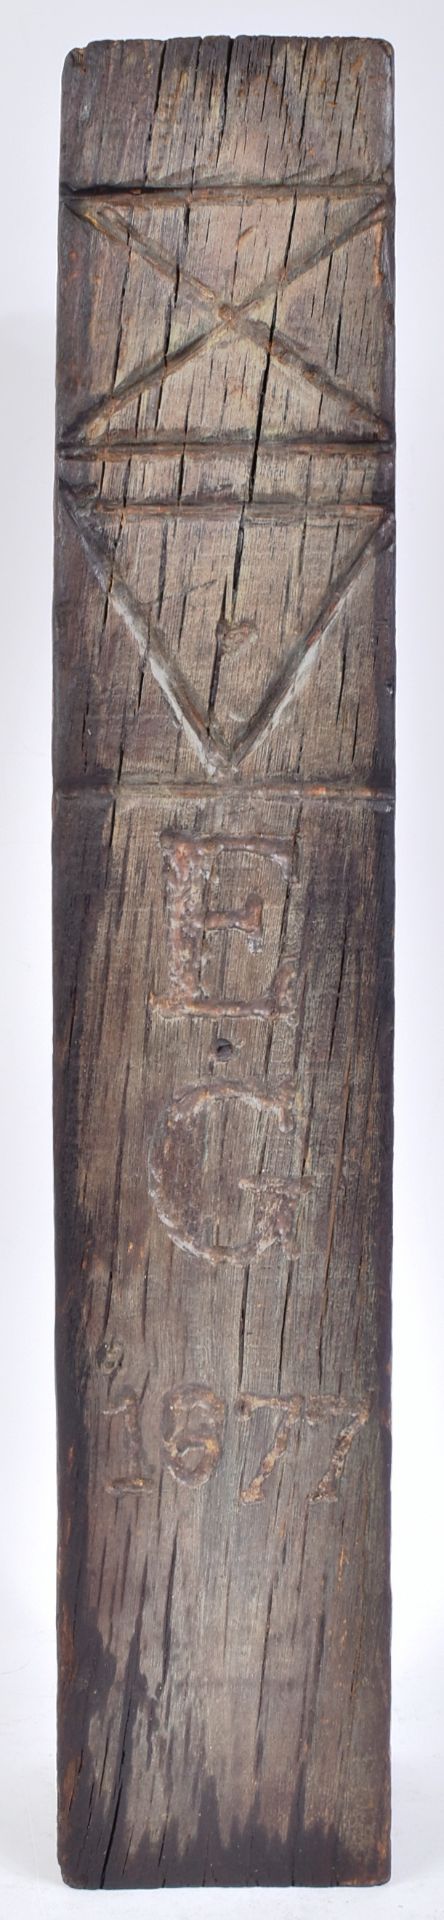 WITCH POST - 1677 DATED WITCHES POST W/CROSS OF ST ANDREW - Image 2 of 5